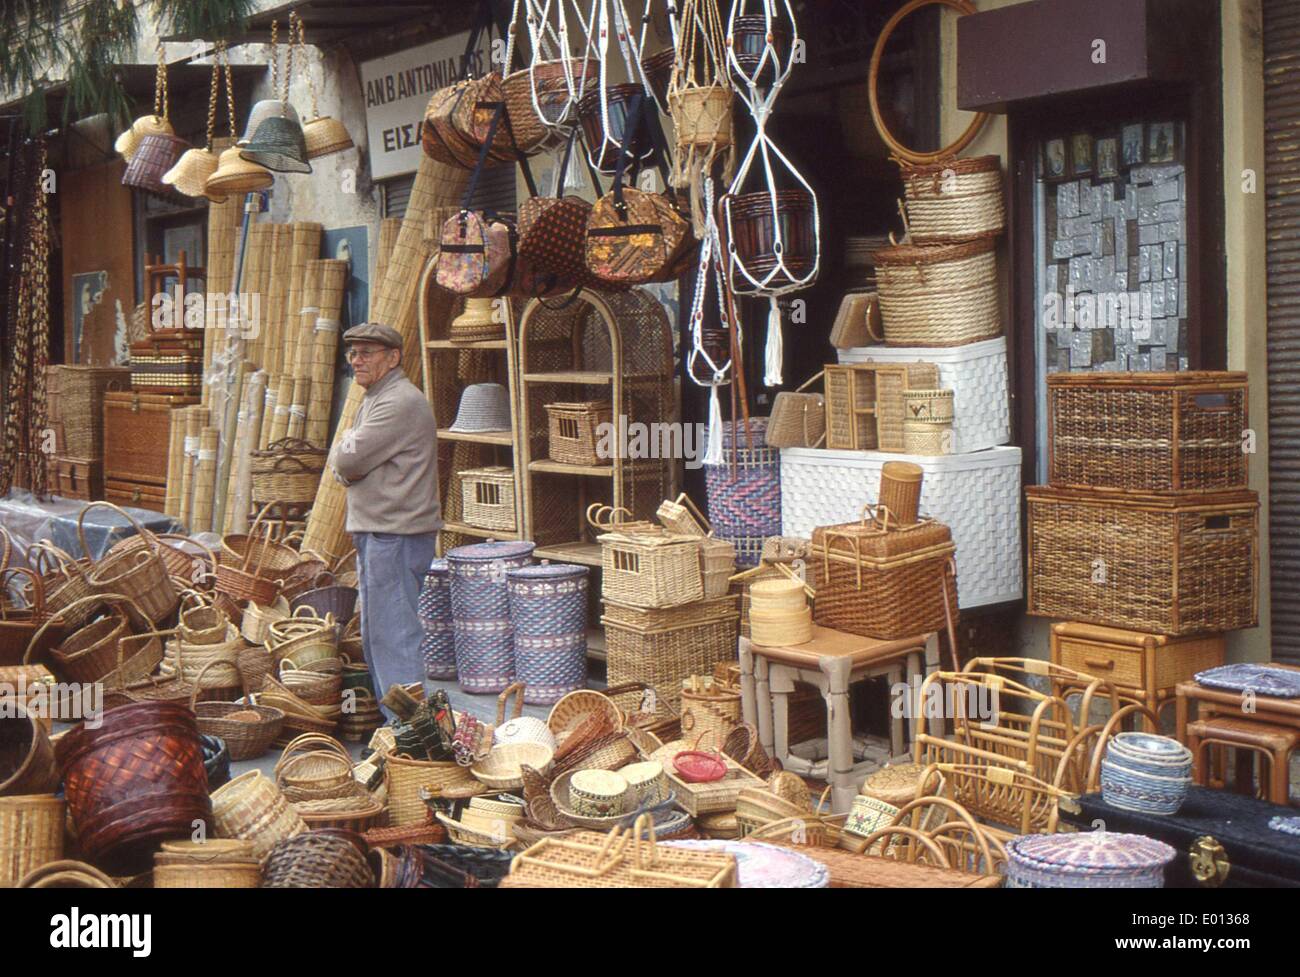 Basketry in Athens, Greece, 1989 Stock Photo